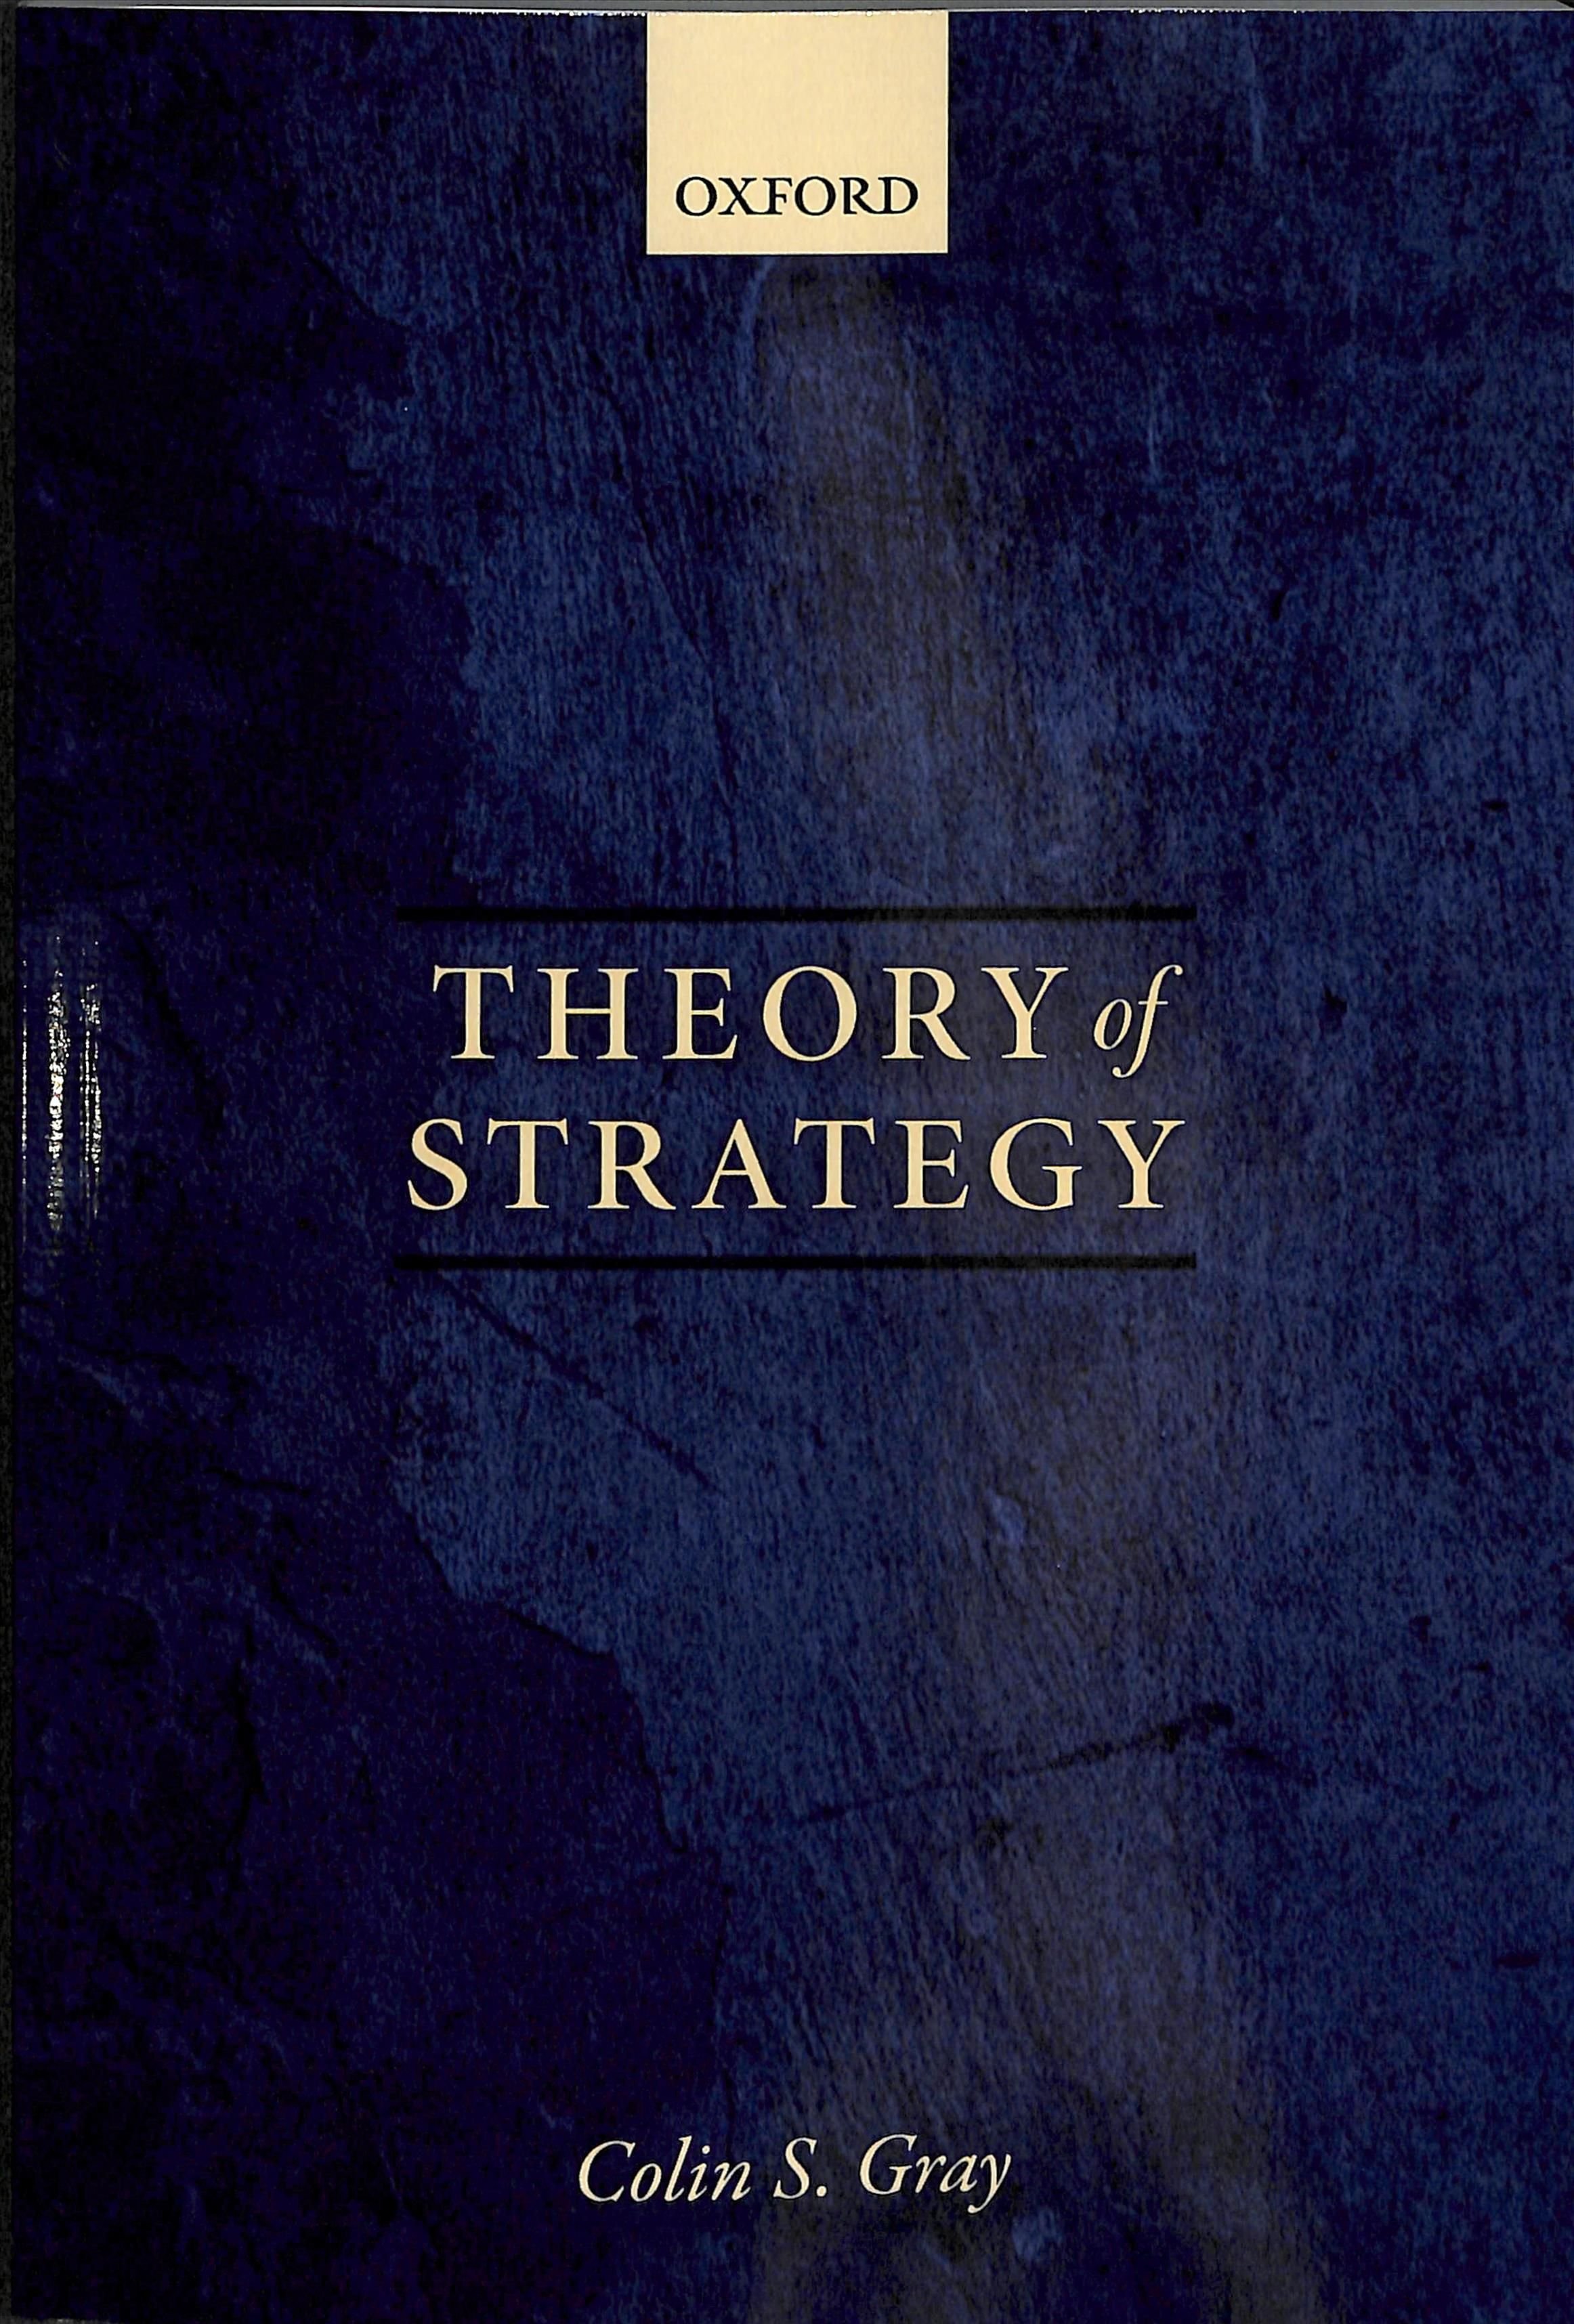 Theory of Strategy